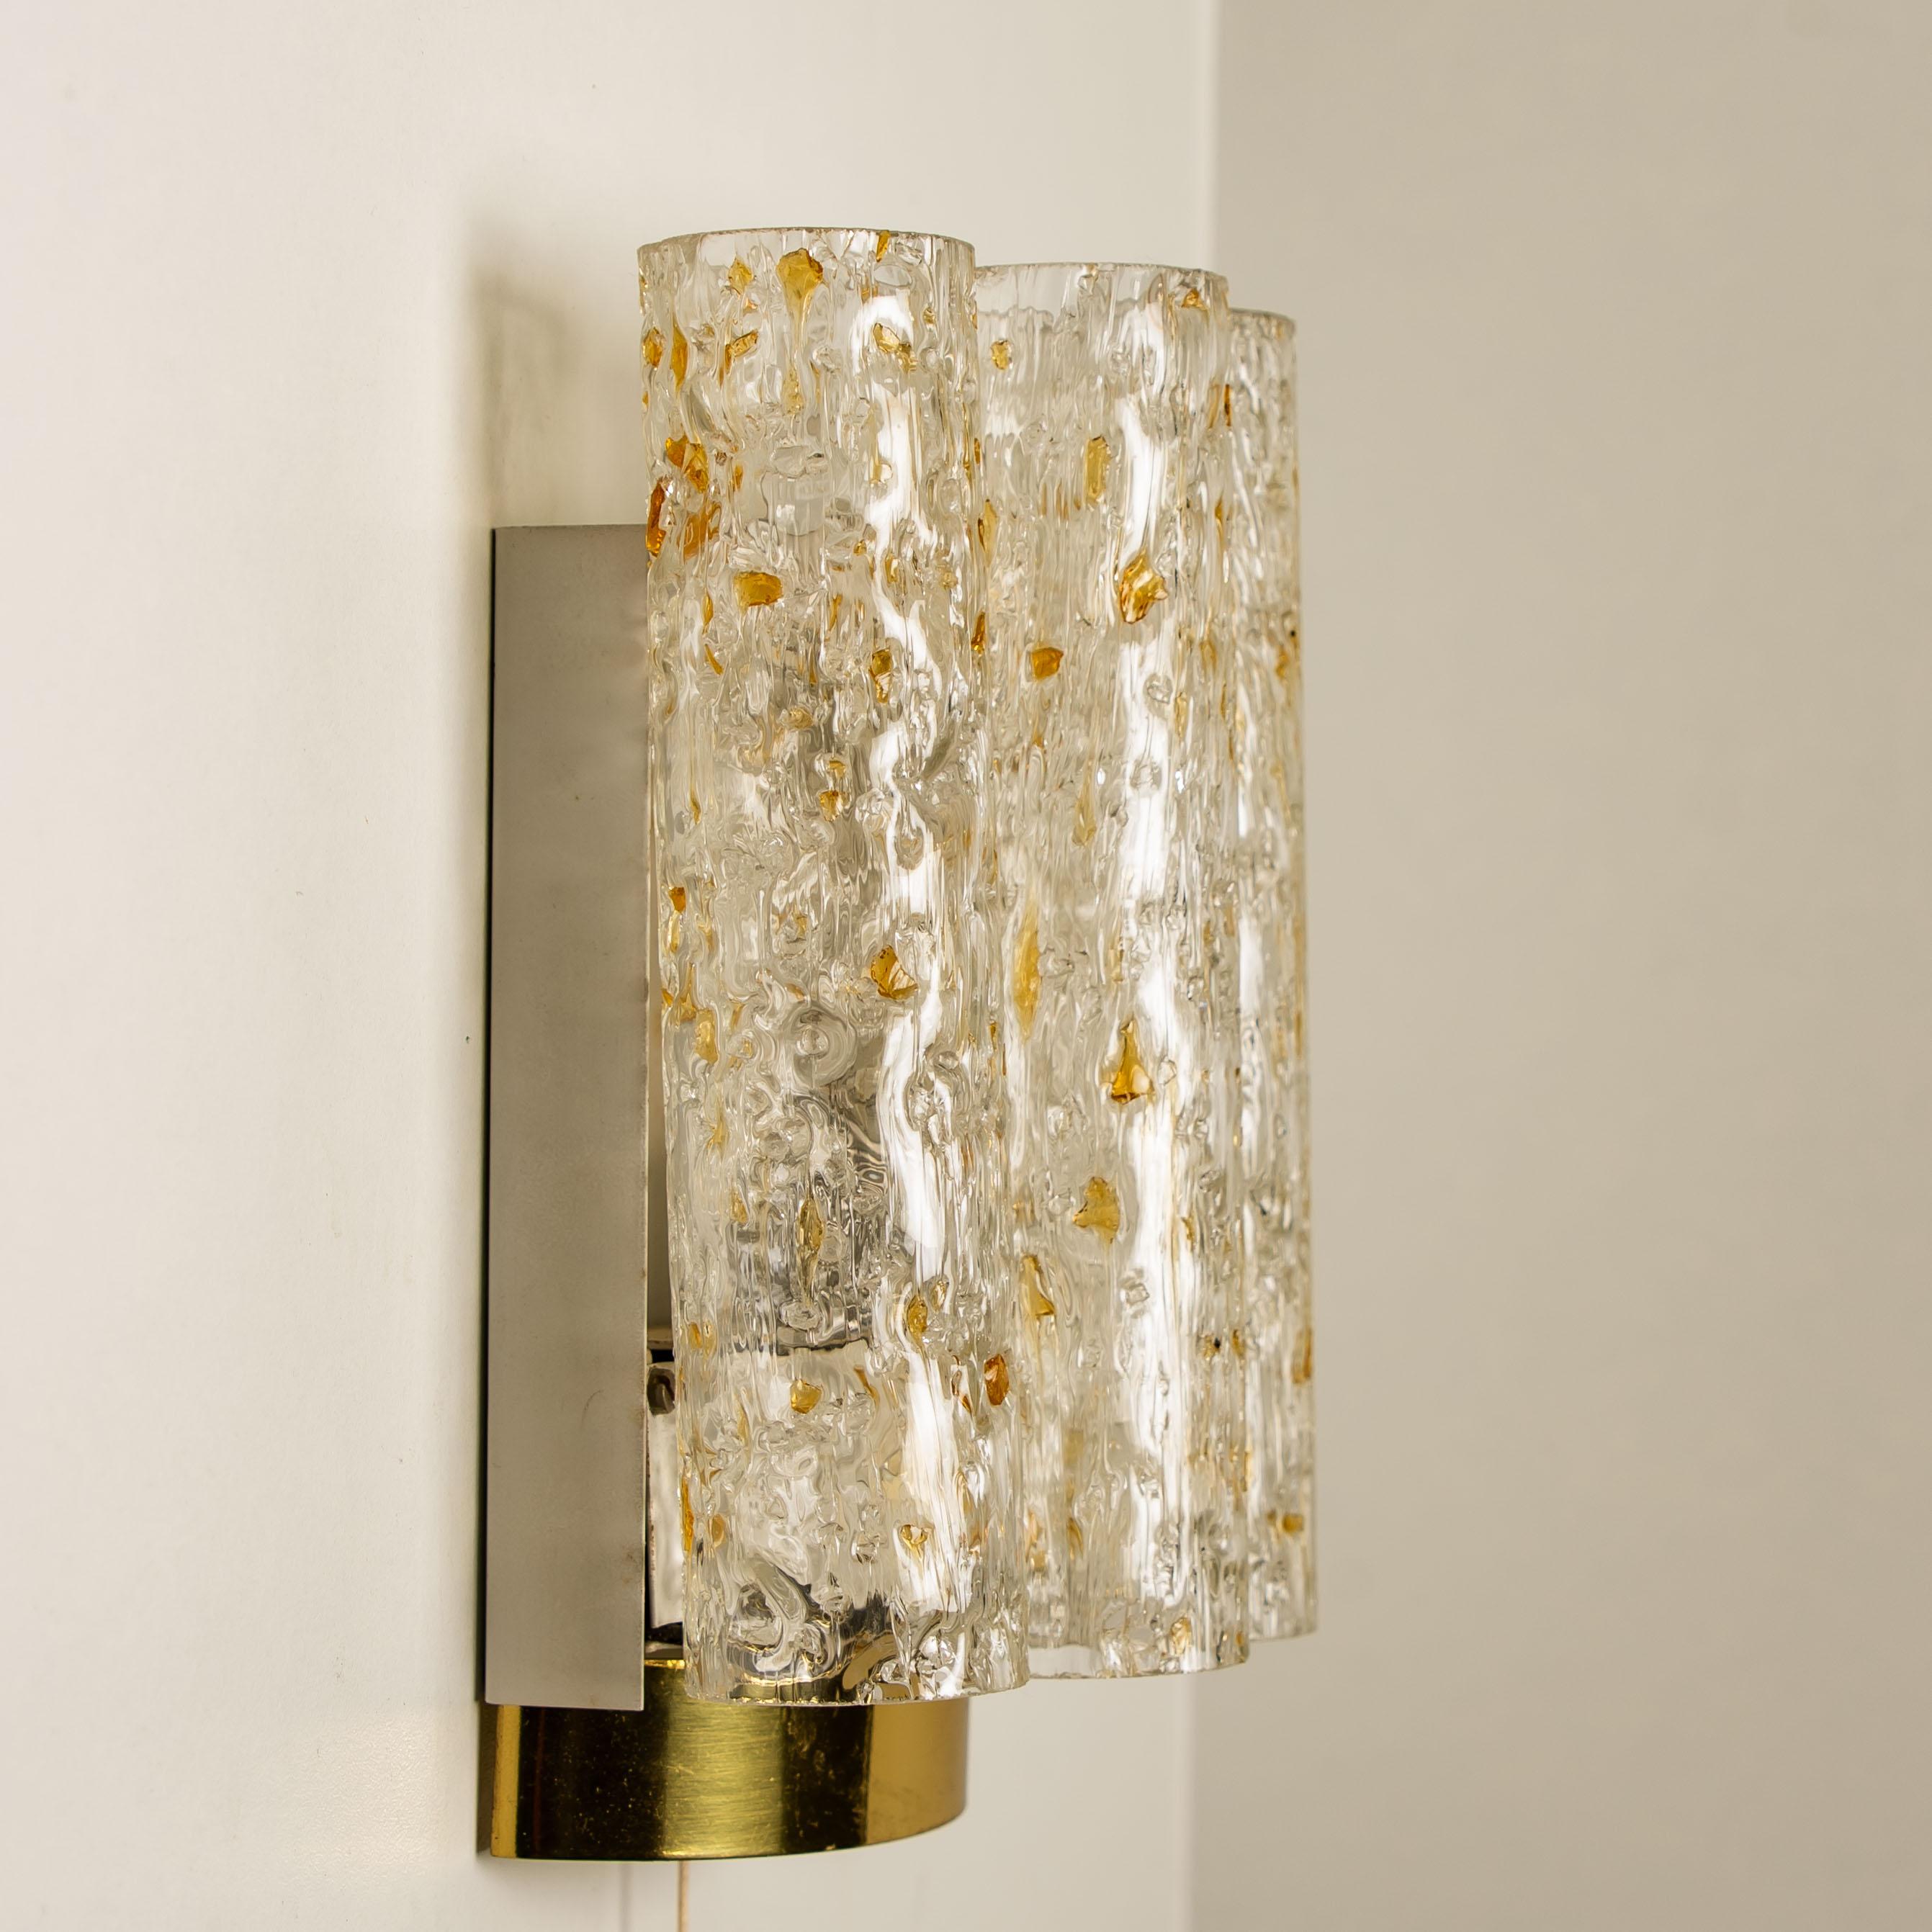 1 of the 6 Doria Wall Lamps in Brass and Glass, 1960s For Sale 7